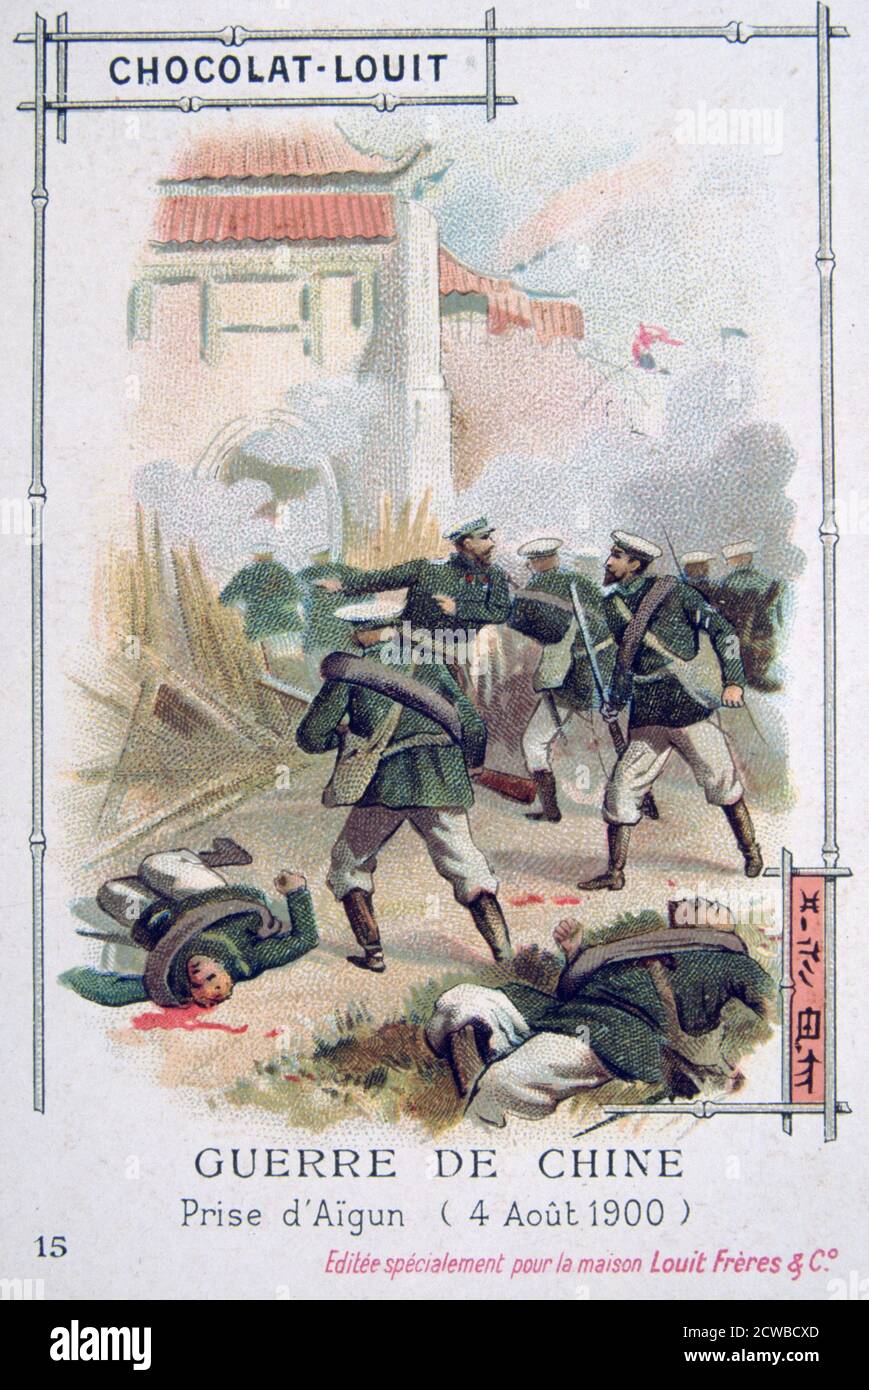 The taking of Aigun by Russian troops, Boxer Rebellion, China, 4 August 1900. The Boxer Uprising or Boxer Rebellion was a Chinese rebellion from November 1899 to September 7, 1901 against foreign influence in areas such as trade, politics, religion and technology that occurred in China during the final years of the Qing Dynasty. The assassination of the German ambassador and the siege of foreign diplomatic legations in Peking prompted Britain, France, Germany, the US, Russia, Japan, Italy and Austria-Hungary to form the Eight Nation Alliance and intervene militarily. French trading card advert Stock Photo